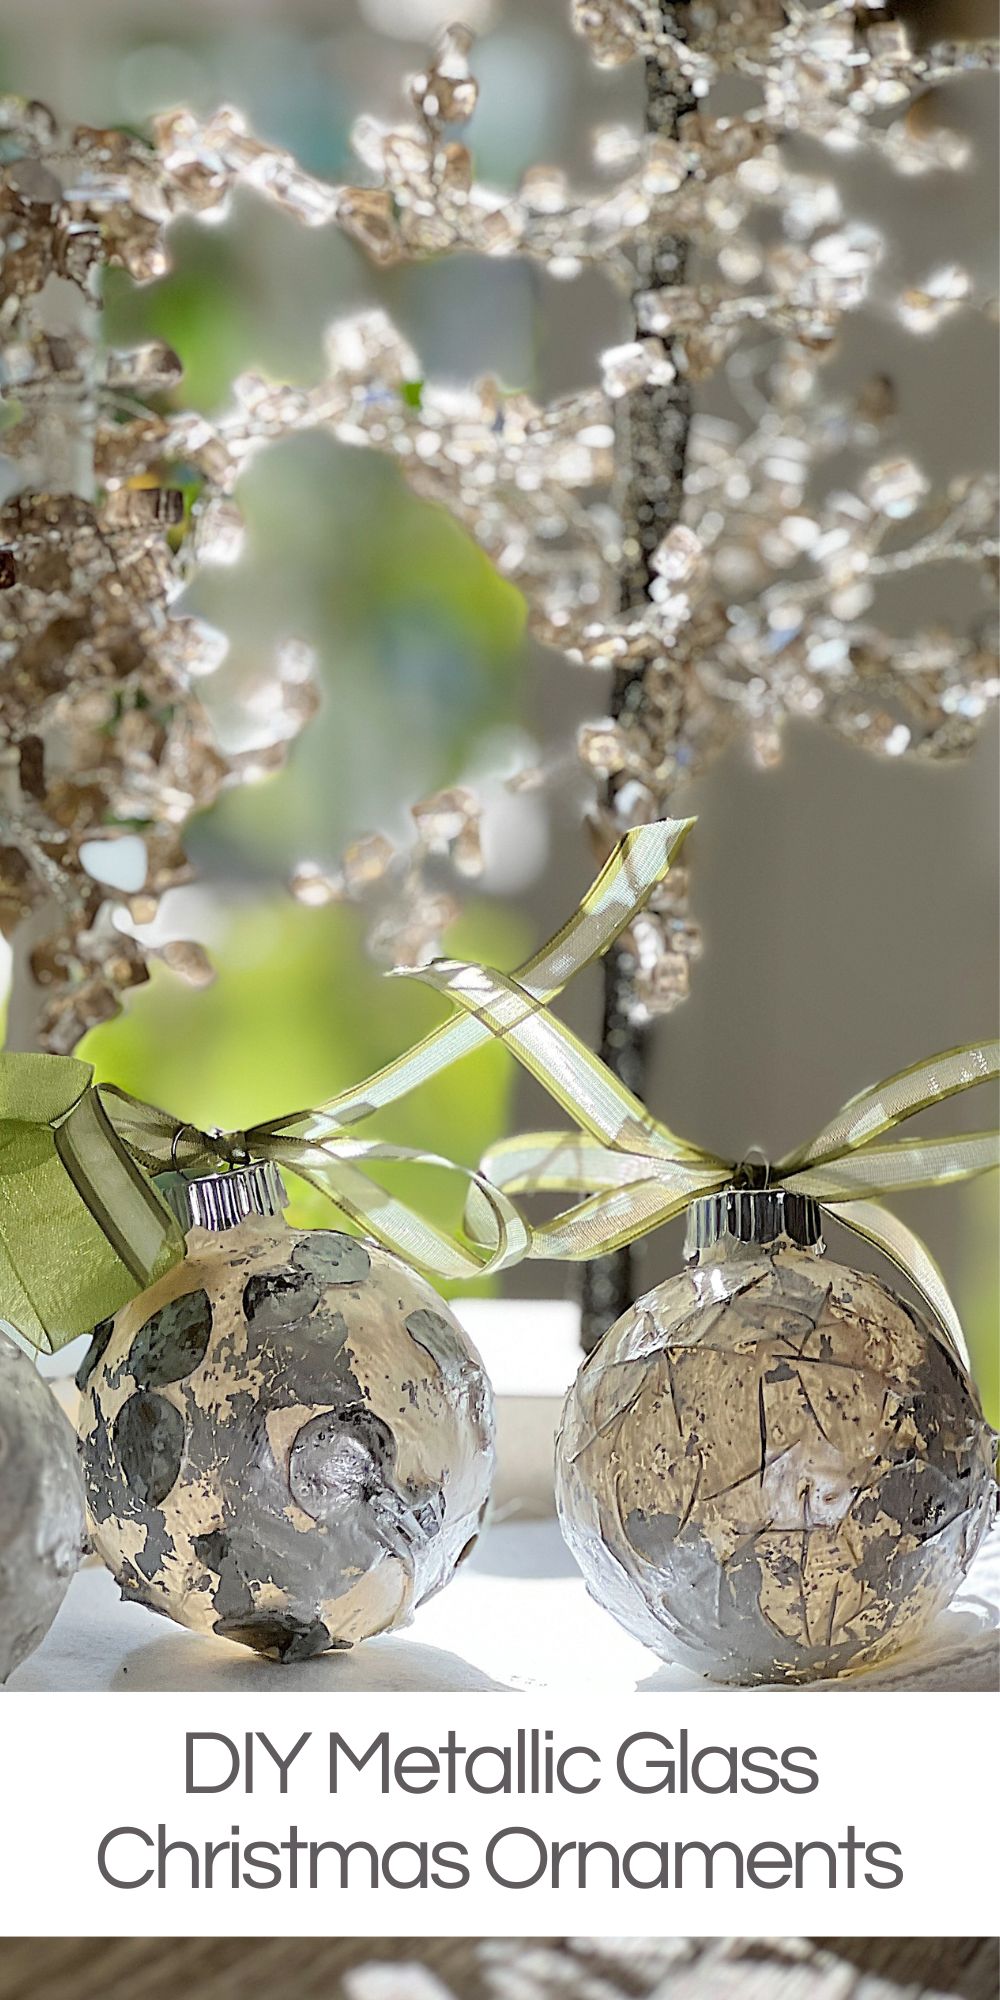 As the holiday season approaches, try adding a personal touch to your Christmas decor by creating your own metallic glass Christmas ornaments.